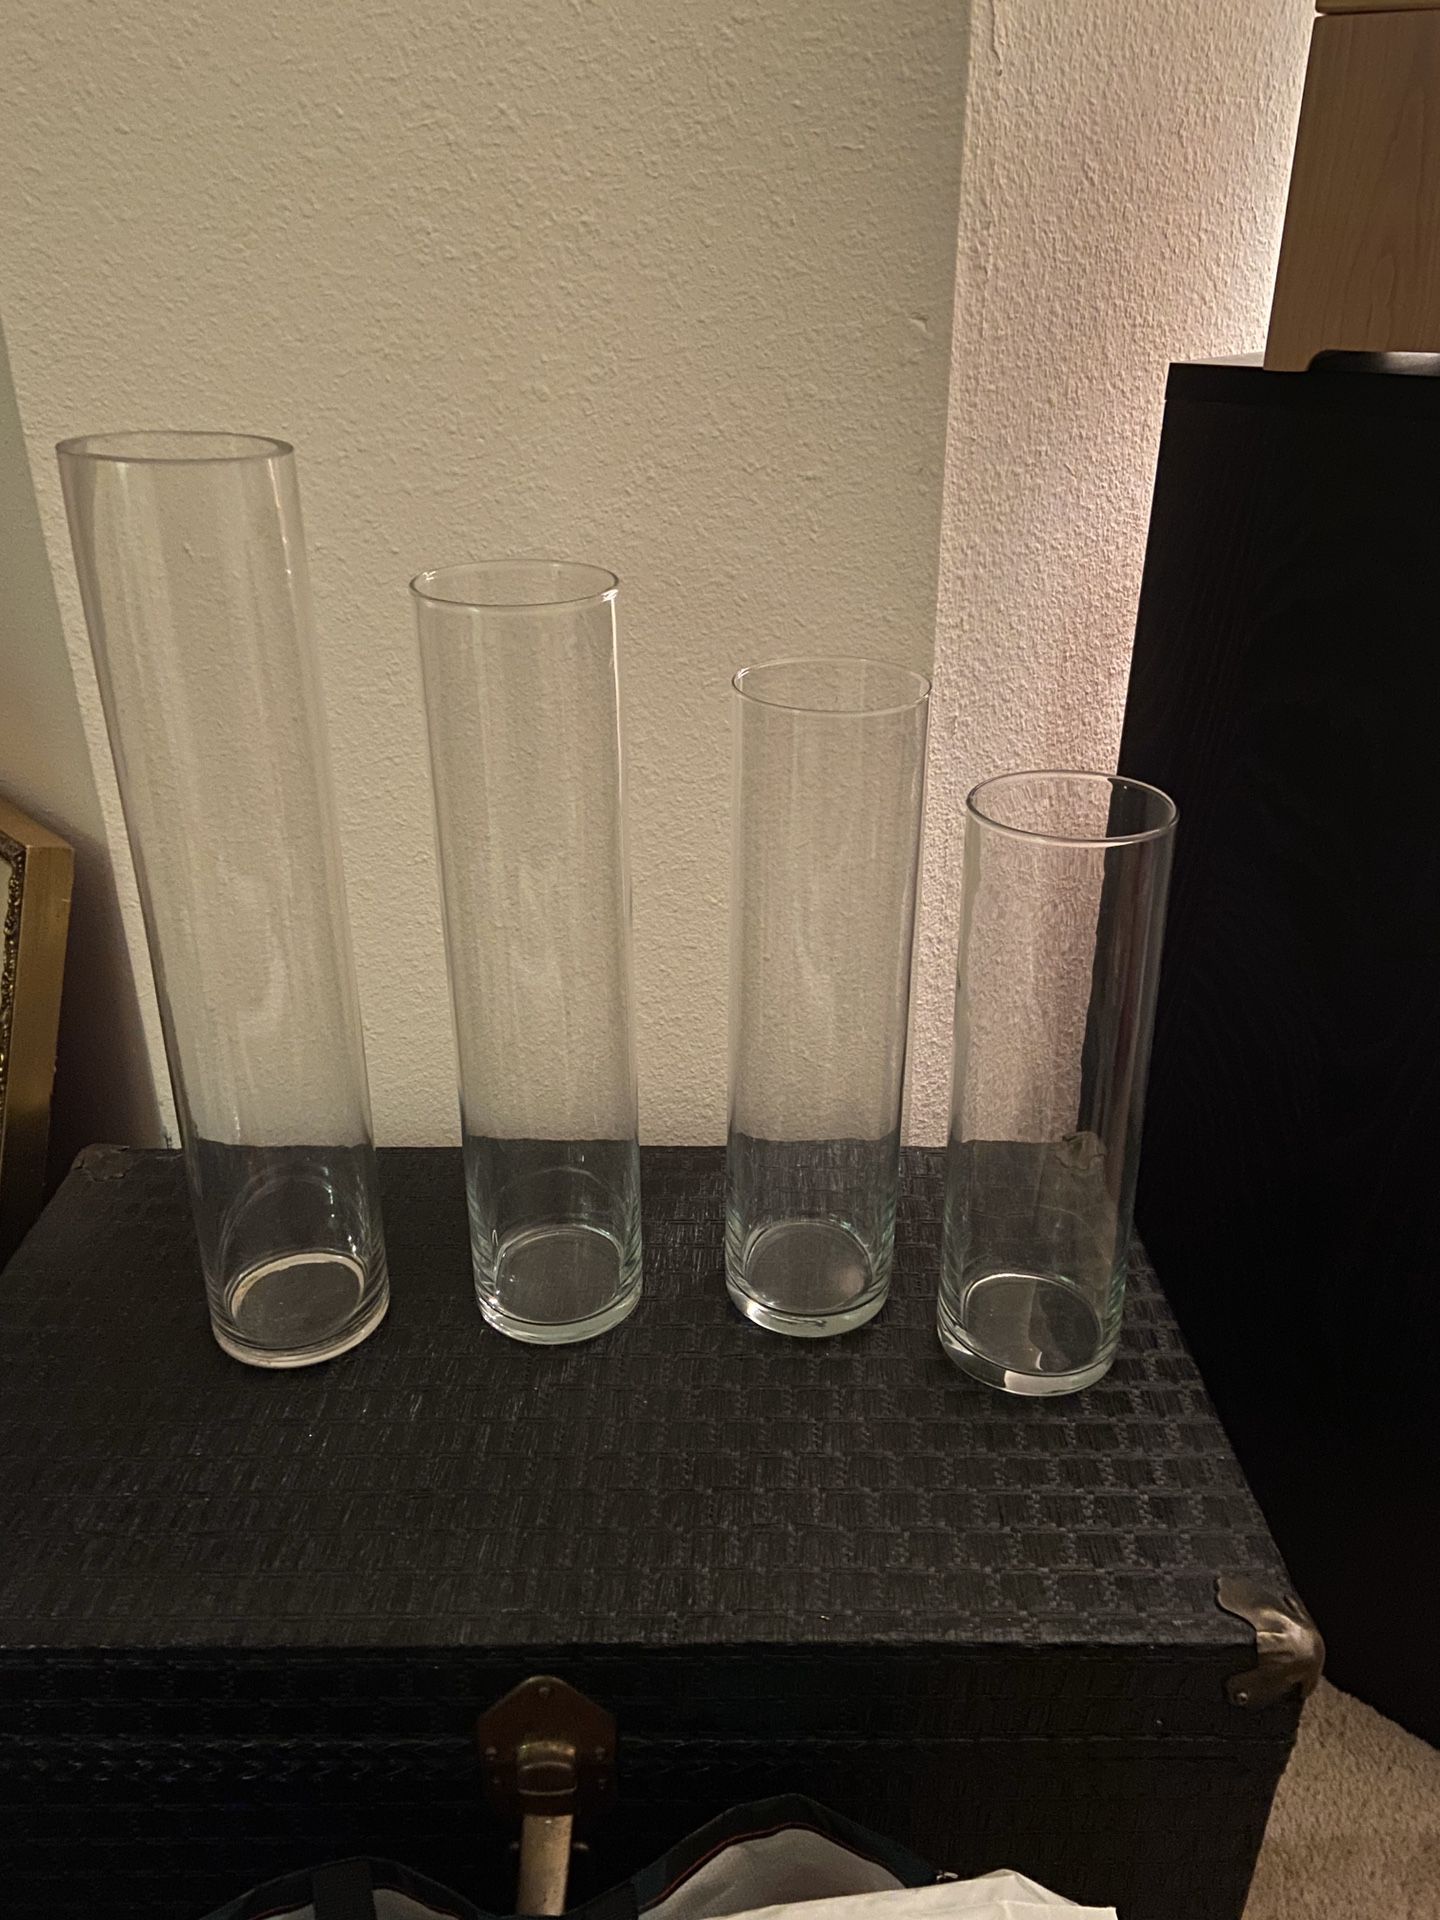 Cylinder floating candle vases (13”, 15”, 17” and 20”)